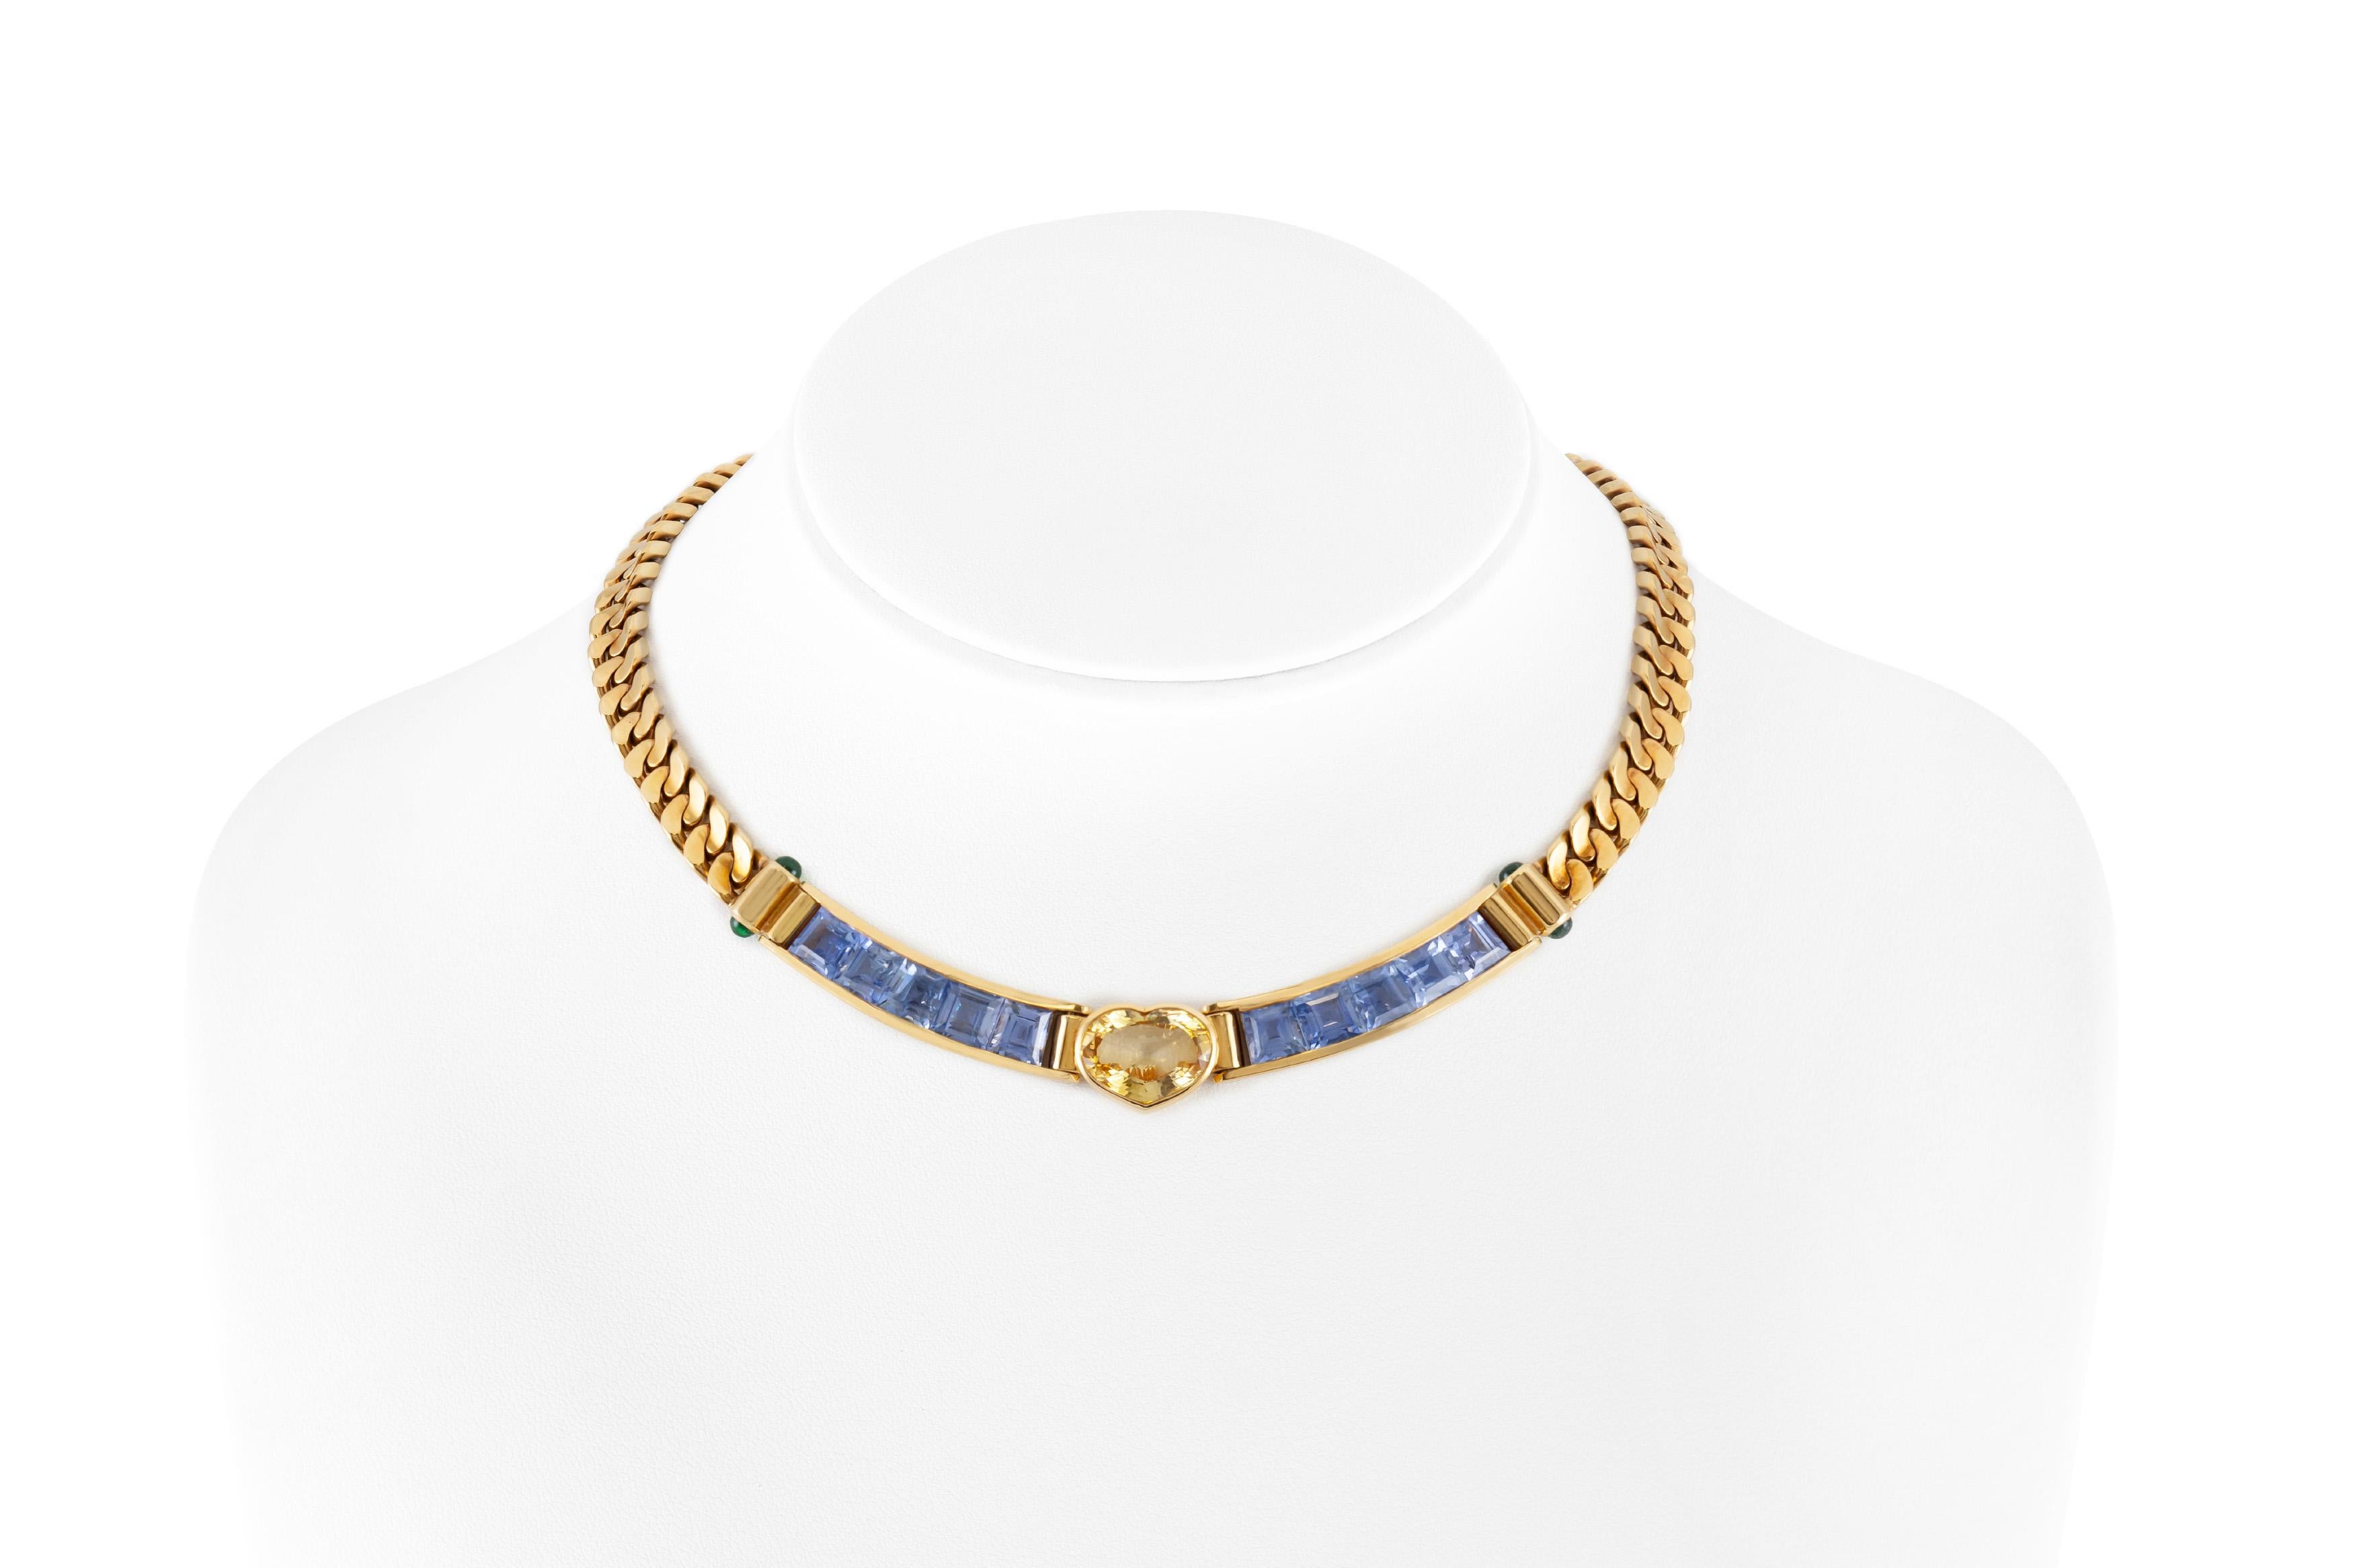 The necklace is finely crafted in 18k yellow gold with a heart cut yellow sapphire weighing 9.23 carats, and blue sapphires weighing a total of 19.58 carats.
Earrings are finely crafted in 18k yellow gold with 4 yellow heart sapphires weighing a